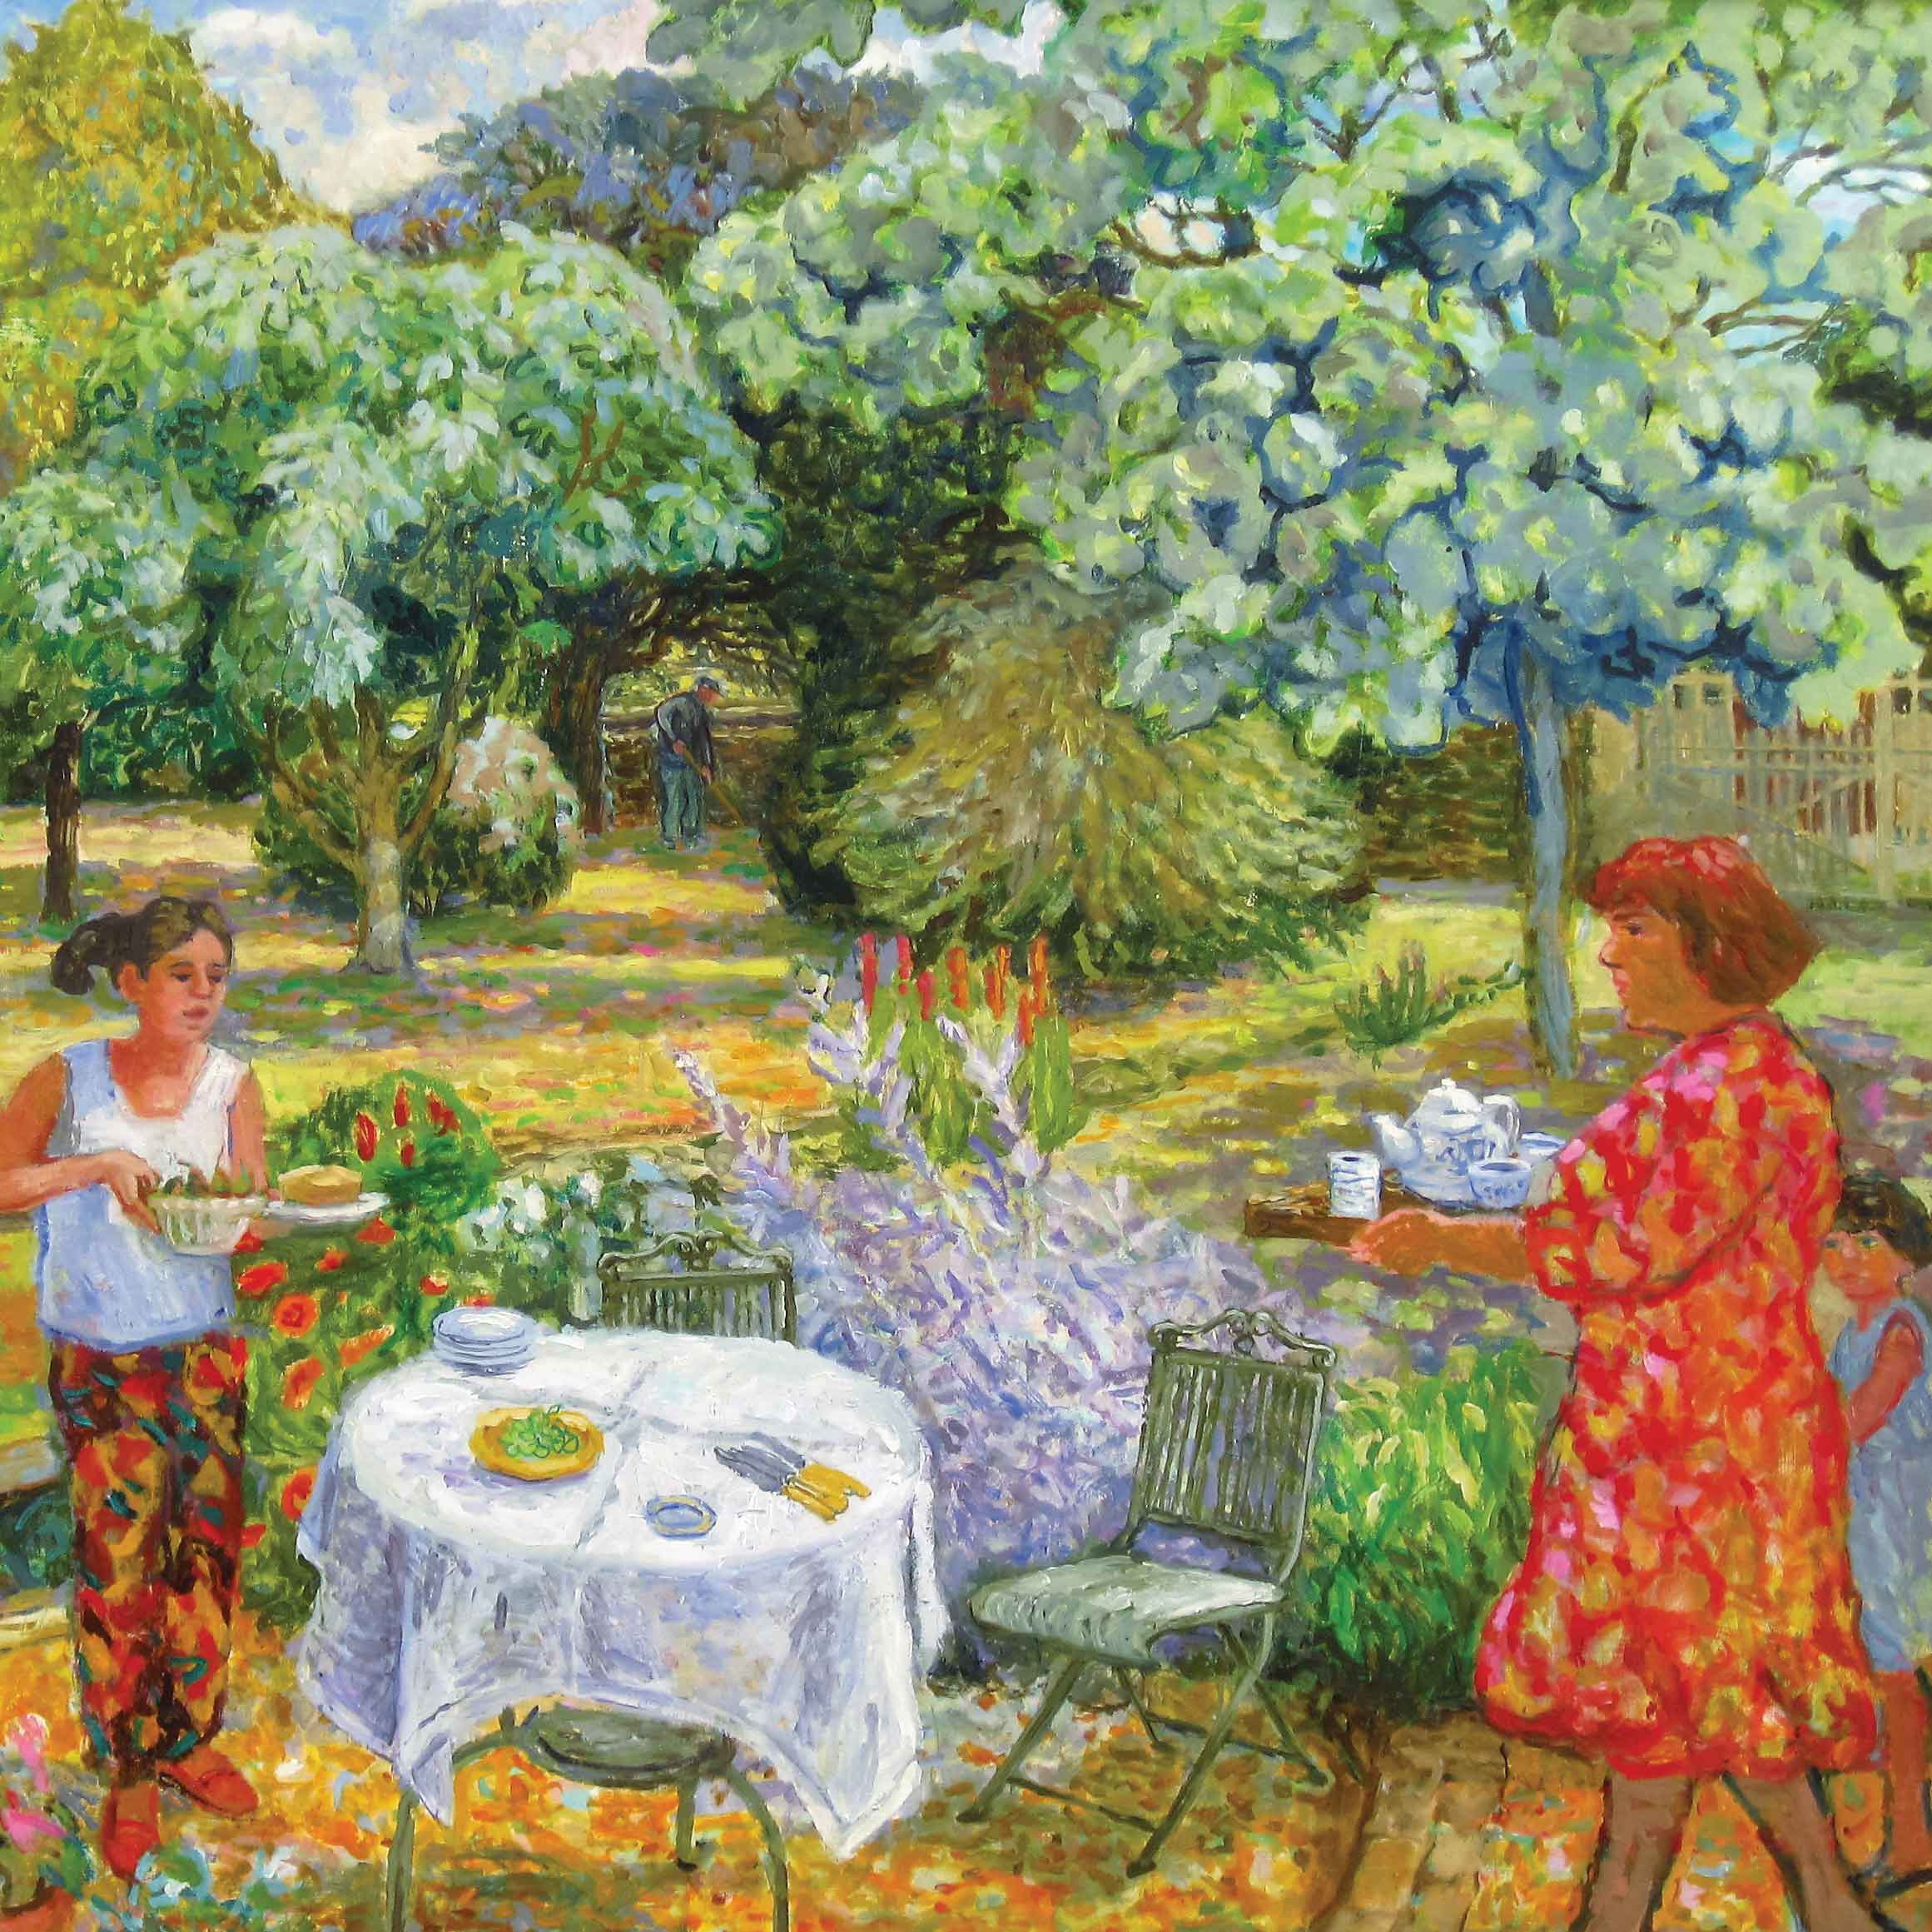 Tea in the Garden by June Berry, Fine Art Greeting Card, Watercolour, Woman and two girls setting garden table